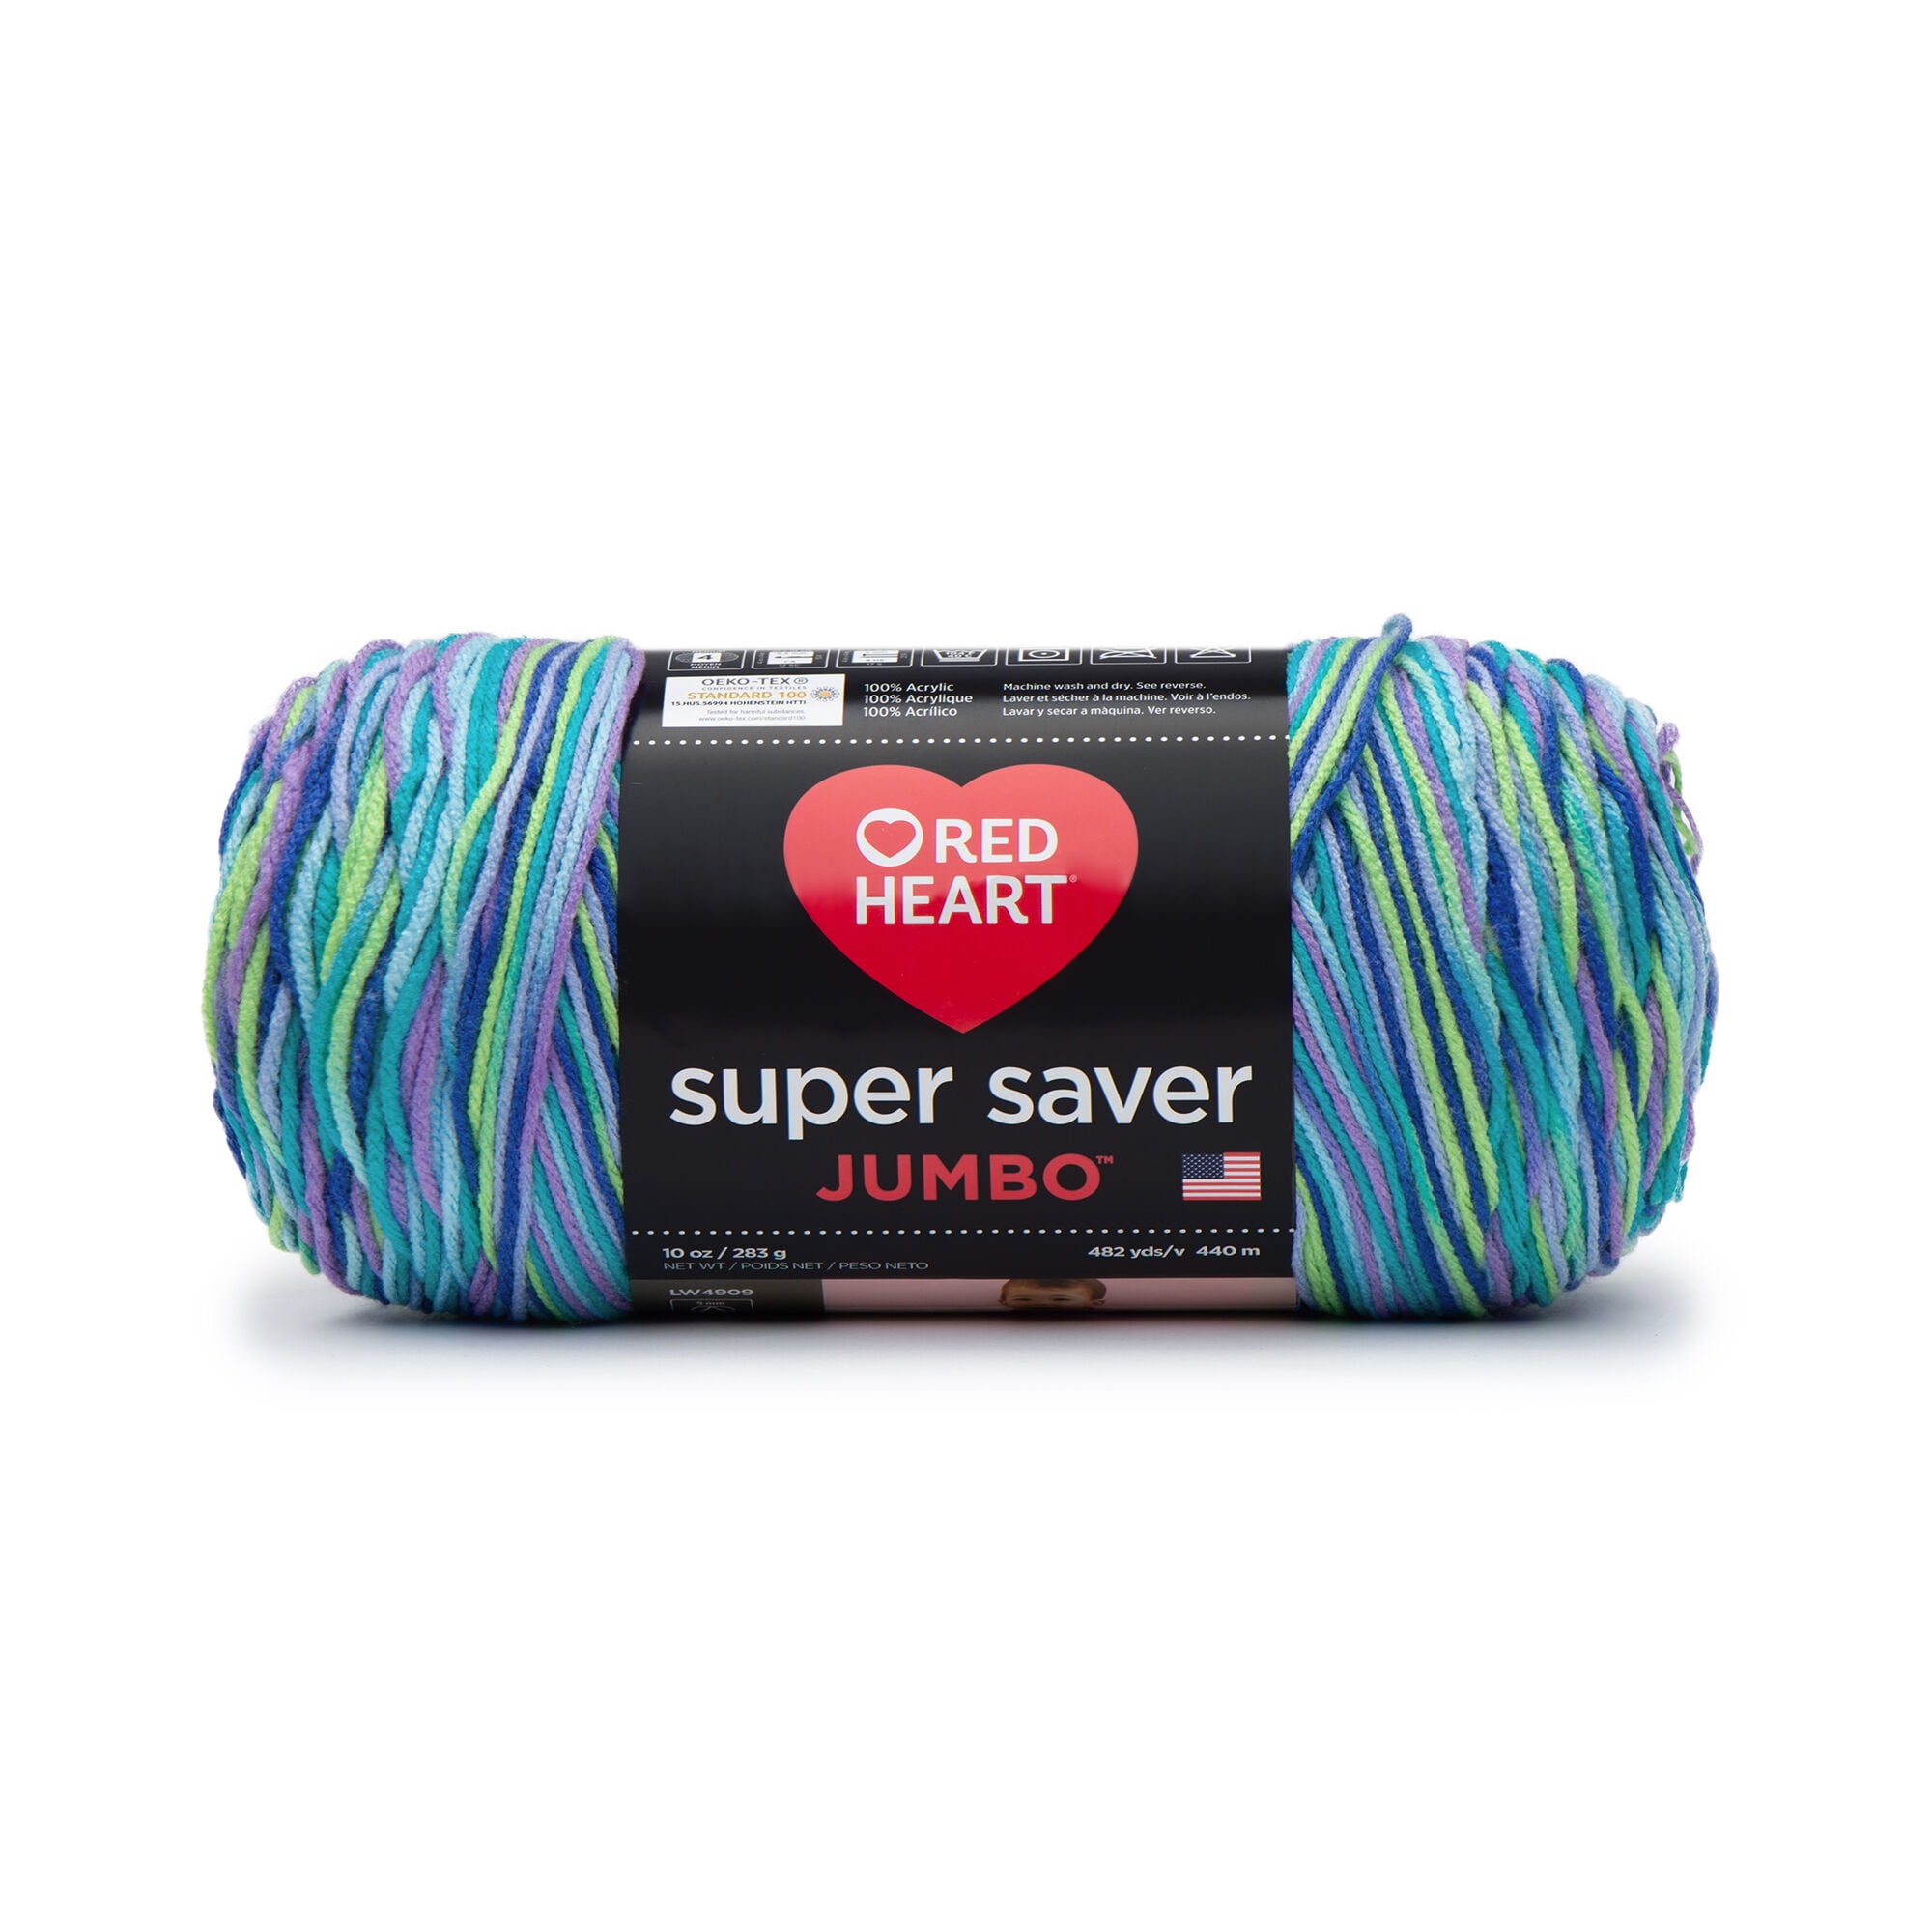 Red Heart Super Saver Acrylic 5 oz in Wildflower